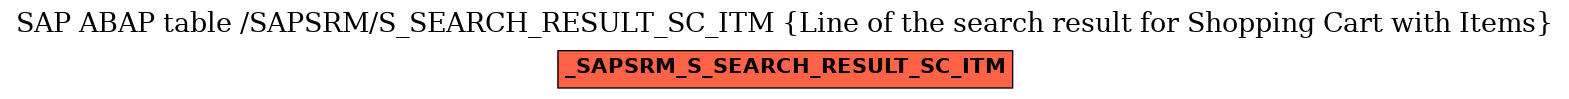 E-R Diagram for table /SAPSRM/S_SEARCH_RESULT_SC_ITM (Line of the search result for Shopping Cart with Items)